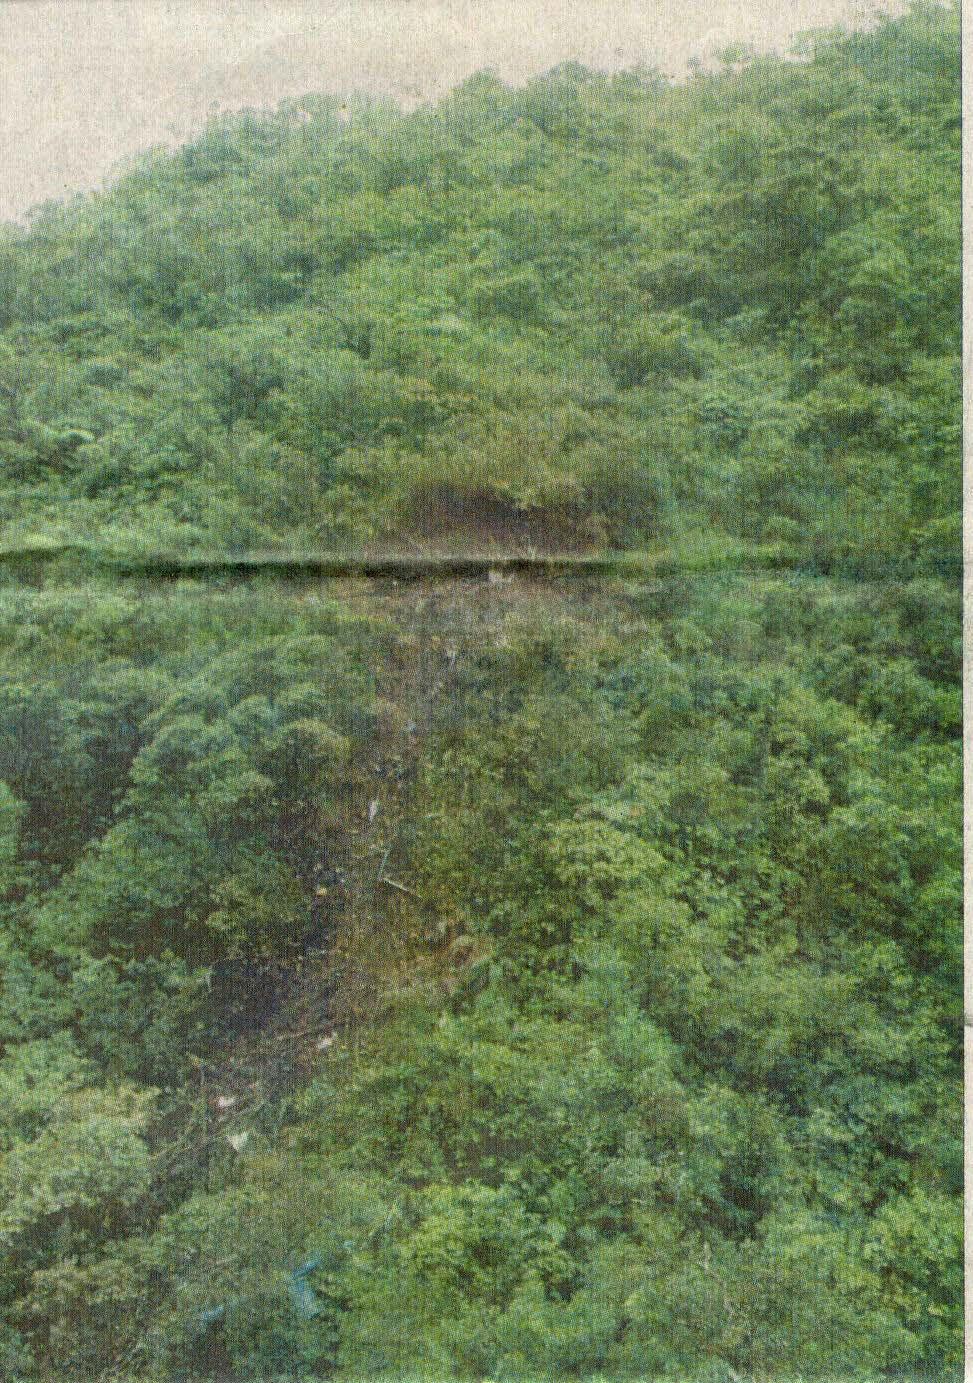 This photo is the crash site, the arrow at the top points what is the helicopters initial point of impact.